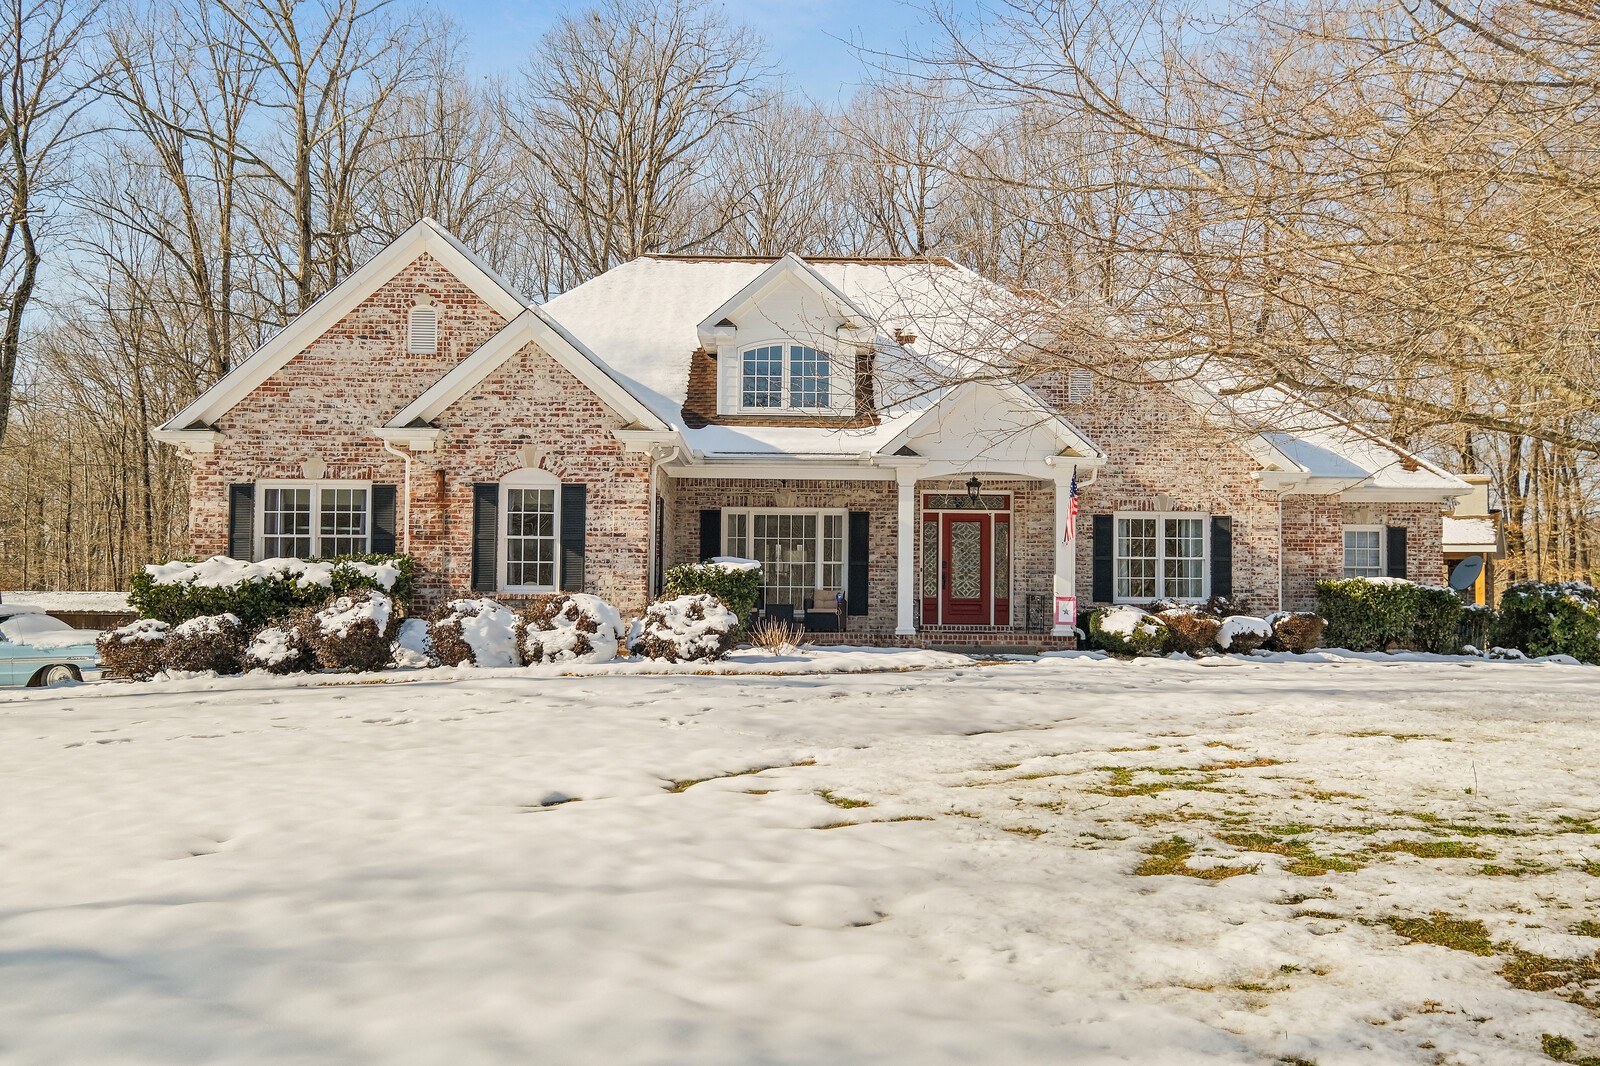 a view of a house with a yard covered in snow